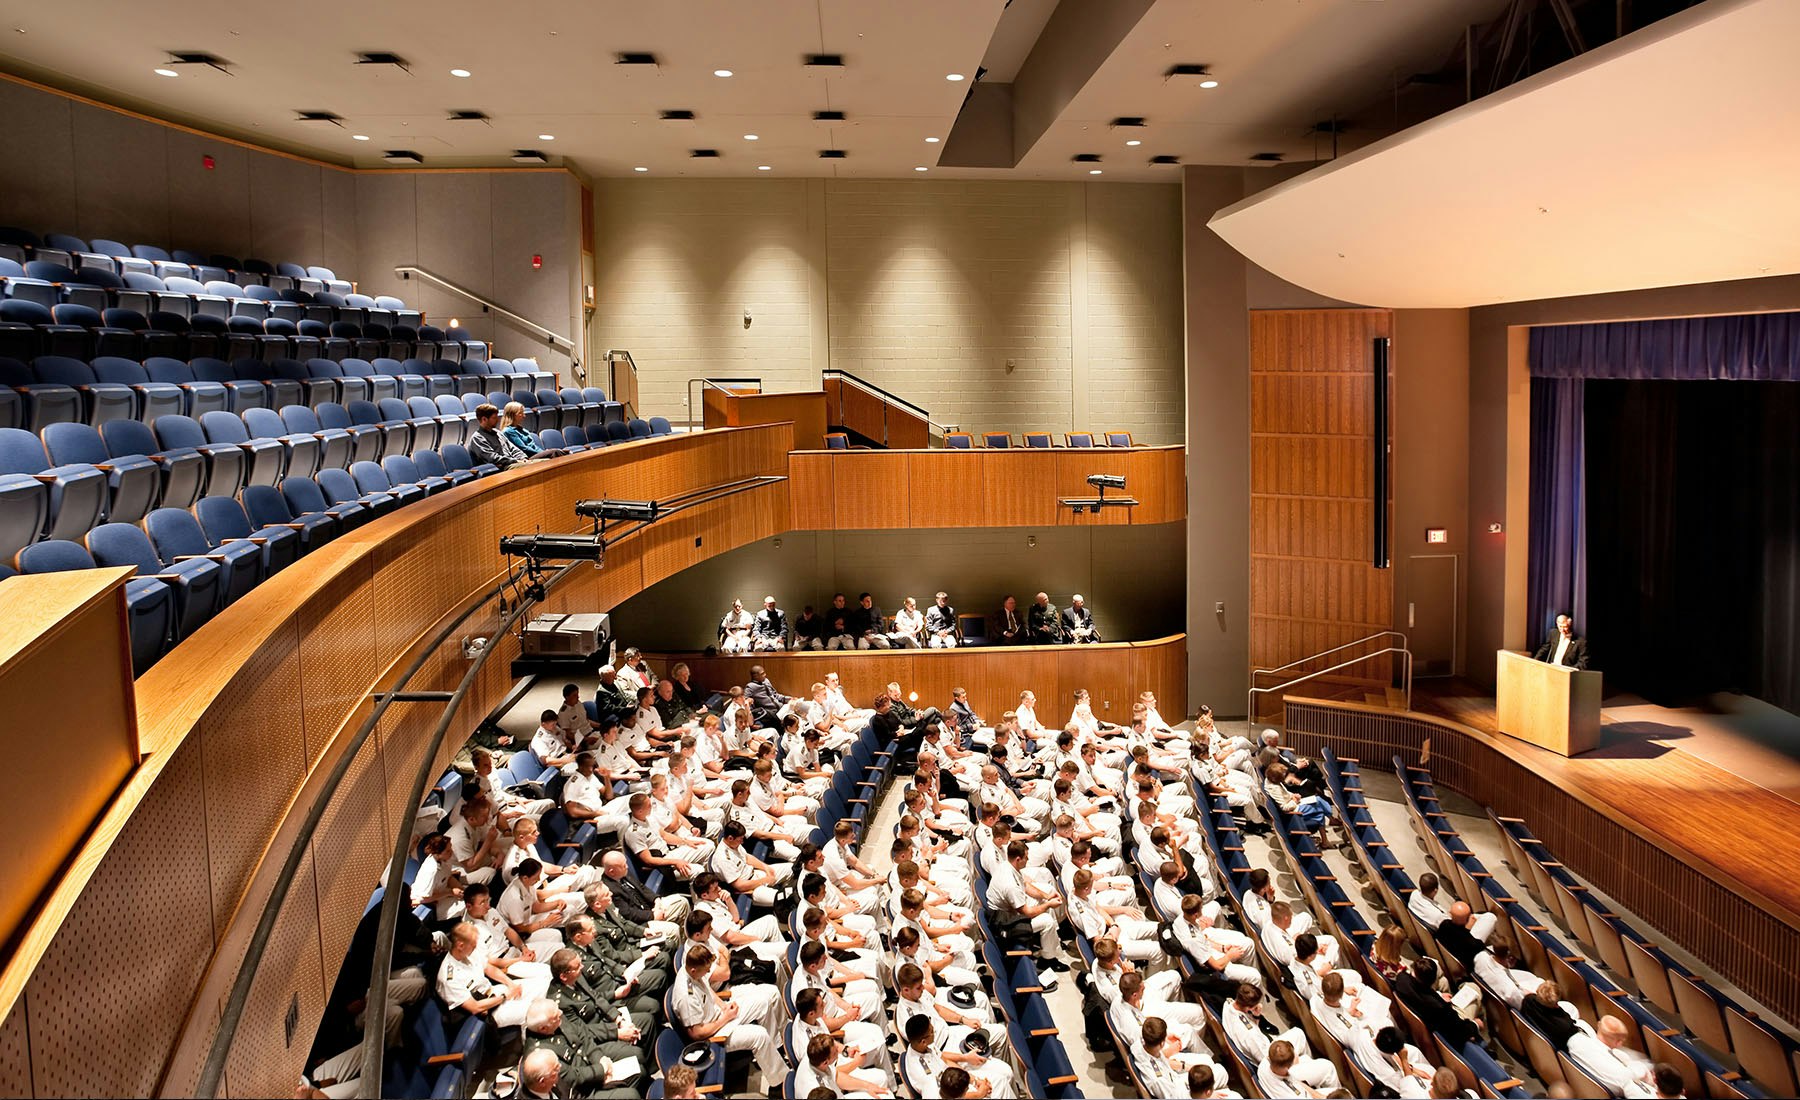 Marshall Hall, the Center for Leadership and Ethics offers an opportunity to integrate this framework with cadet experiences and extend the Institute’s mission to national recognition. It includes a 500-seat Auditorium, several breakout Meeting Rooms for symposia and conference, a multi-purpose Assembly hall to accommodate up to 800 persons in a banquet setting, and administrative space for the program’s director and staff.